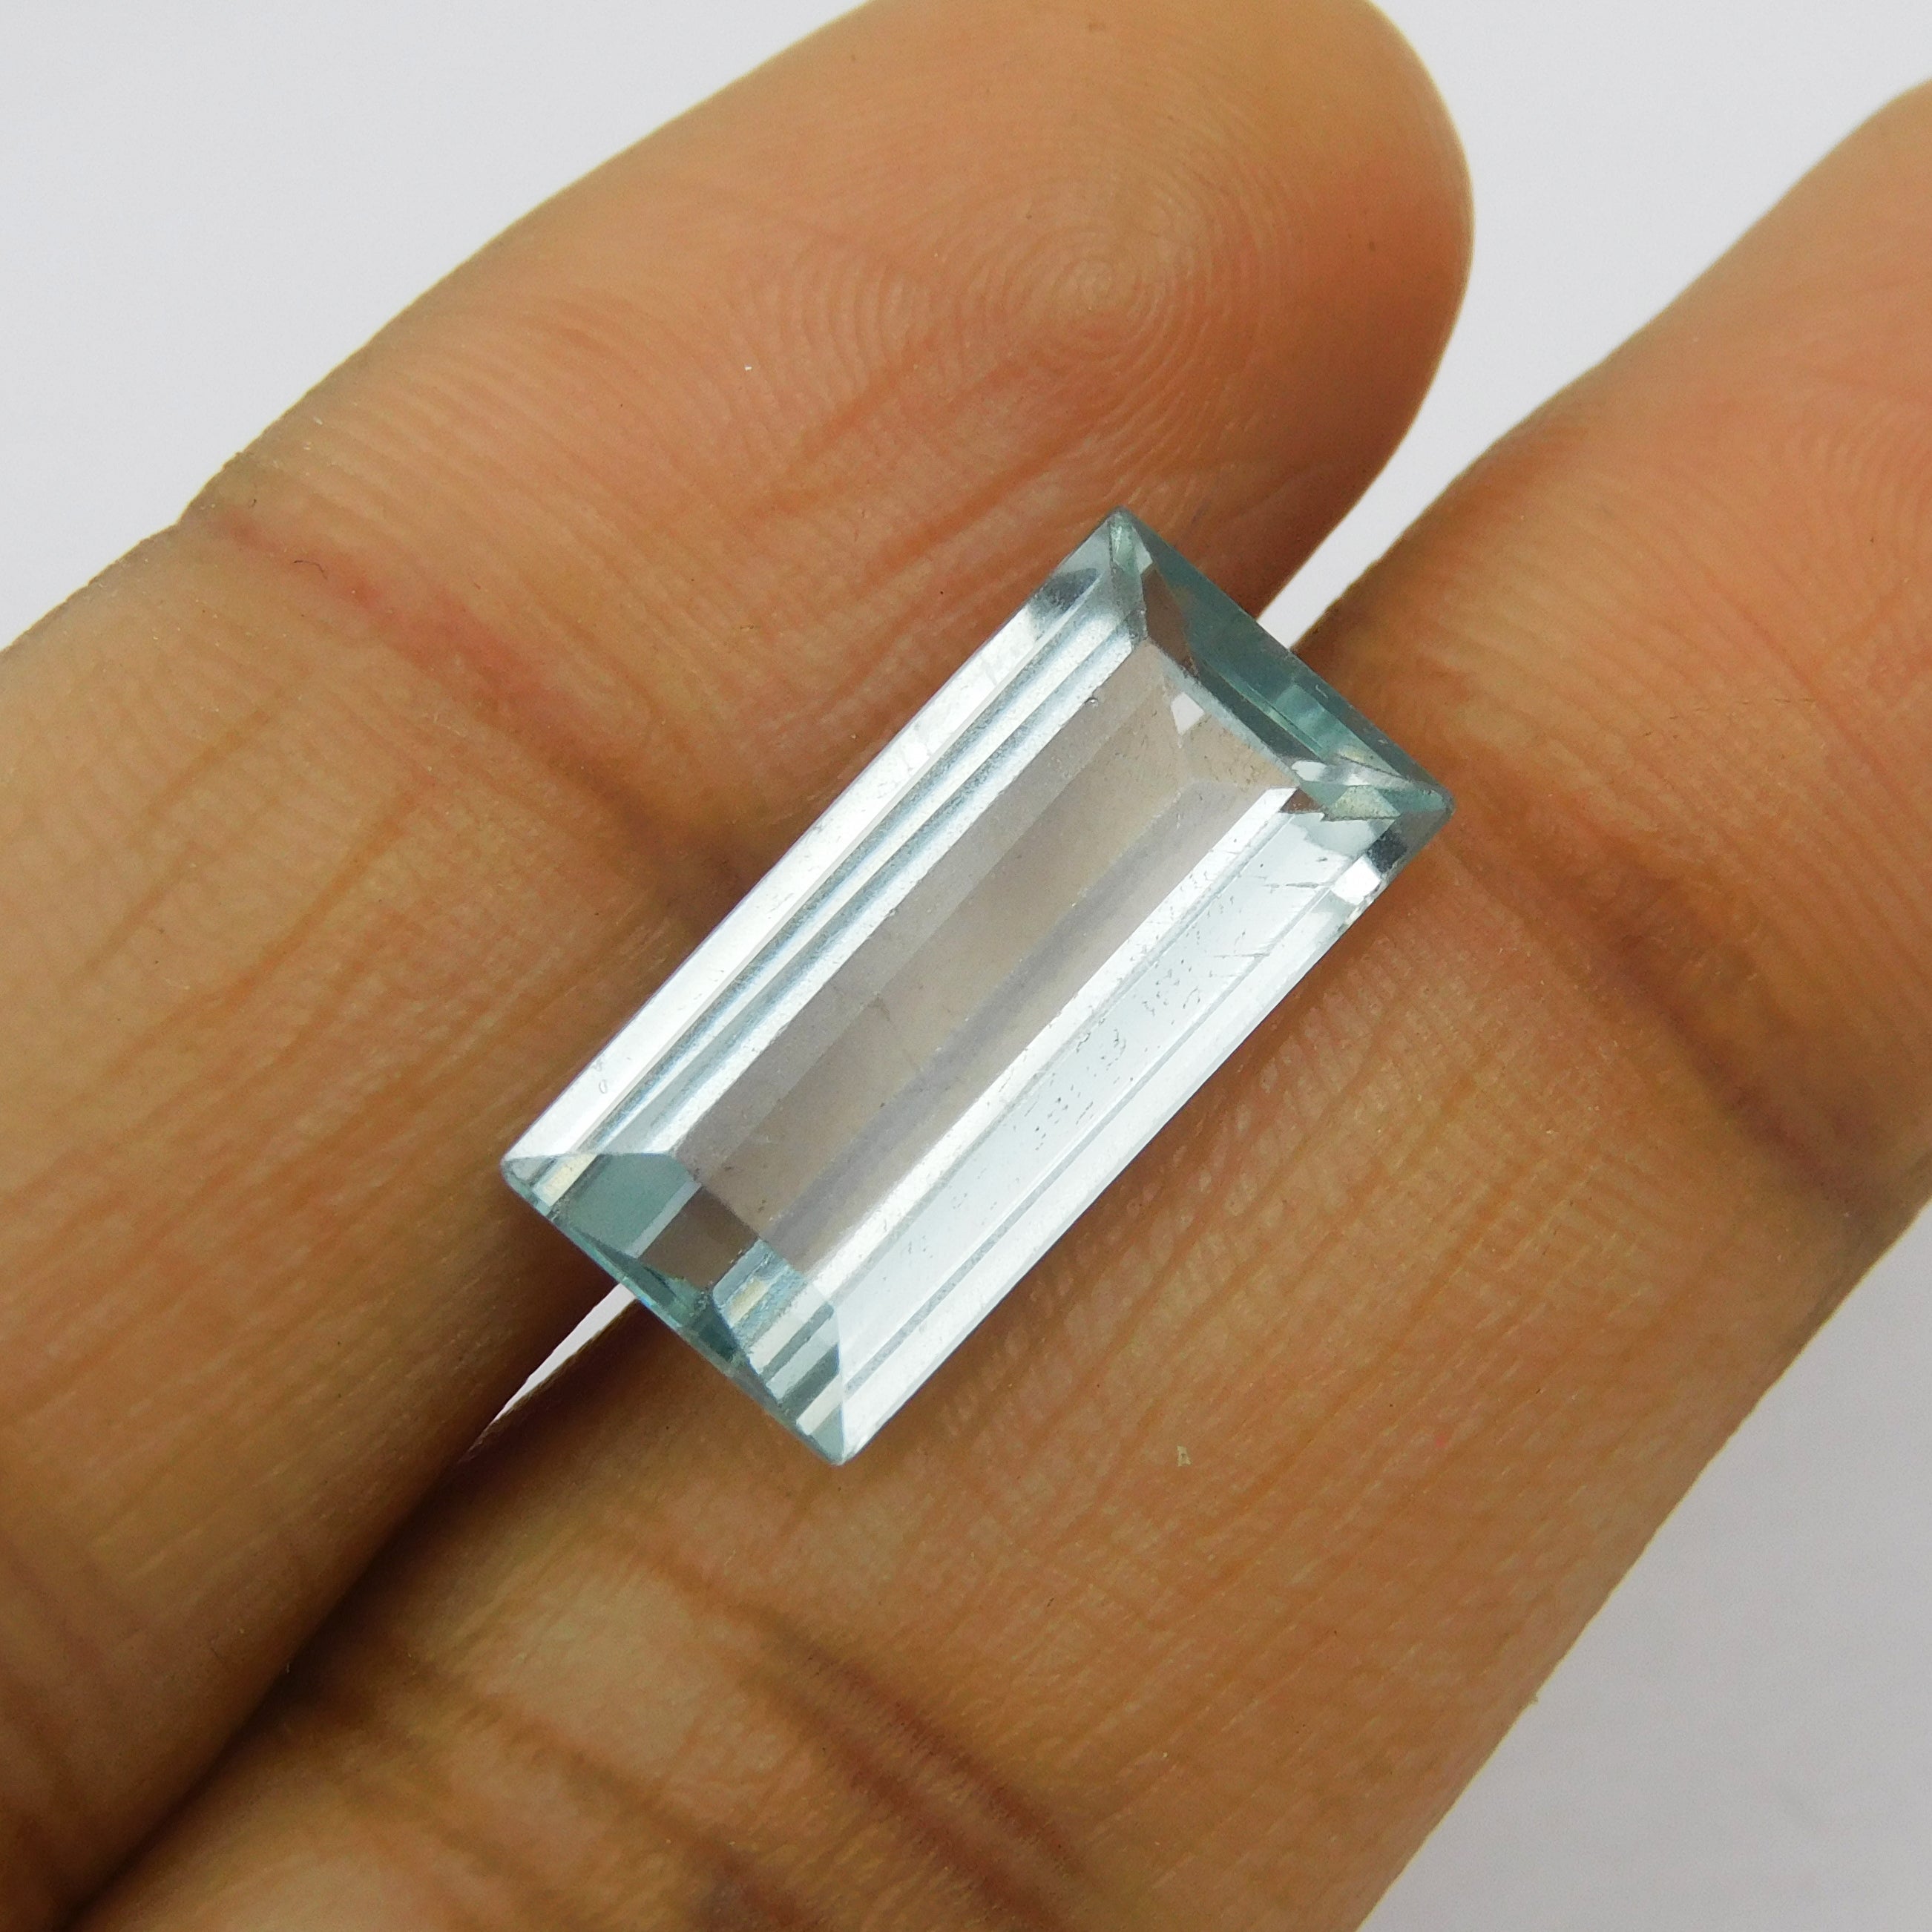 Most Beautiful Aqua Gem !!! Natural Baguette Cut 4.65 Carat Aquamarine Blue Loose Gemstone Certified | Free Delivery Free Gift | Gift For Her/ Him